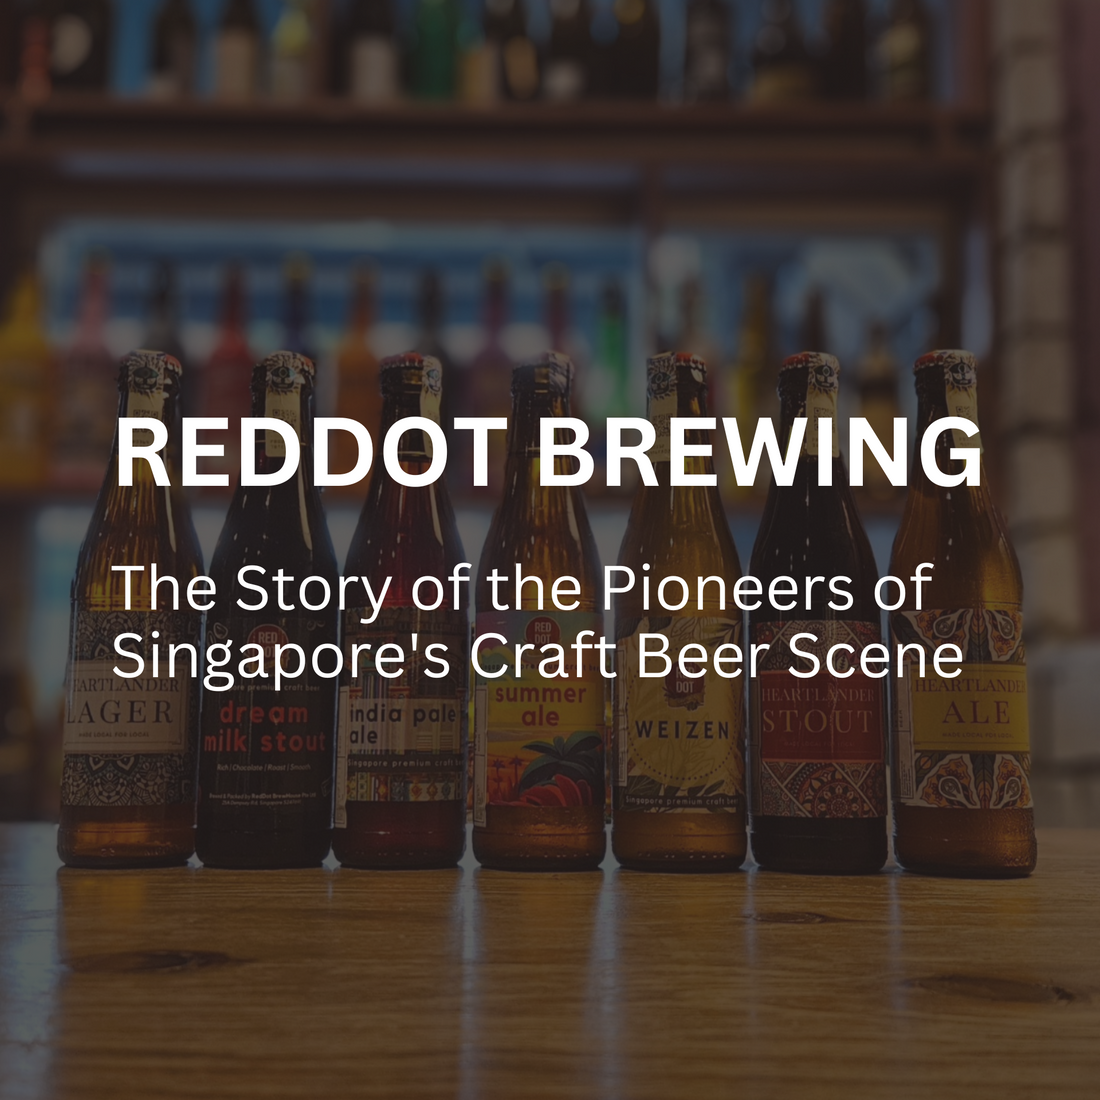 The Story of the Pioneers of Singapore's Craft Beer Scene